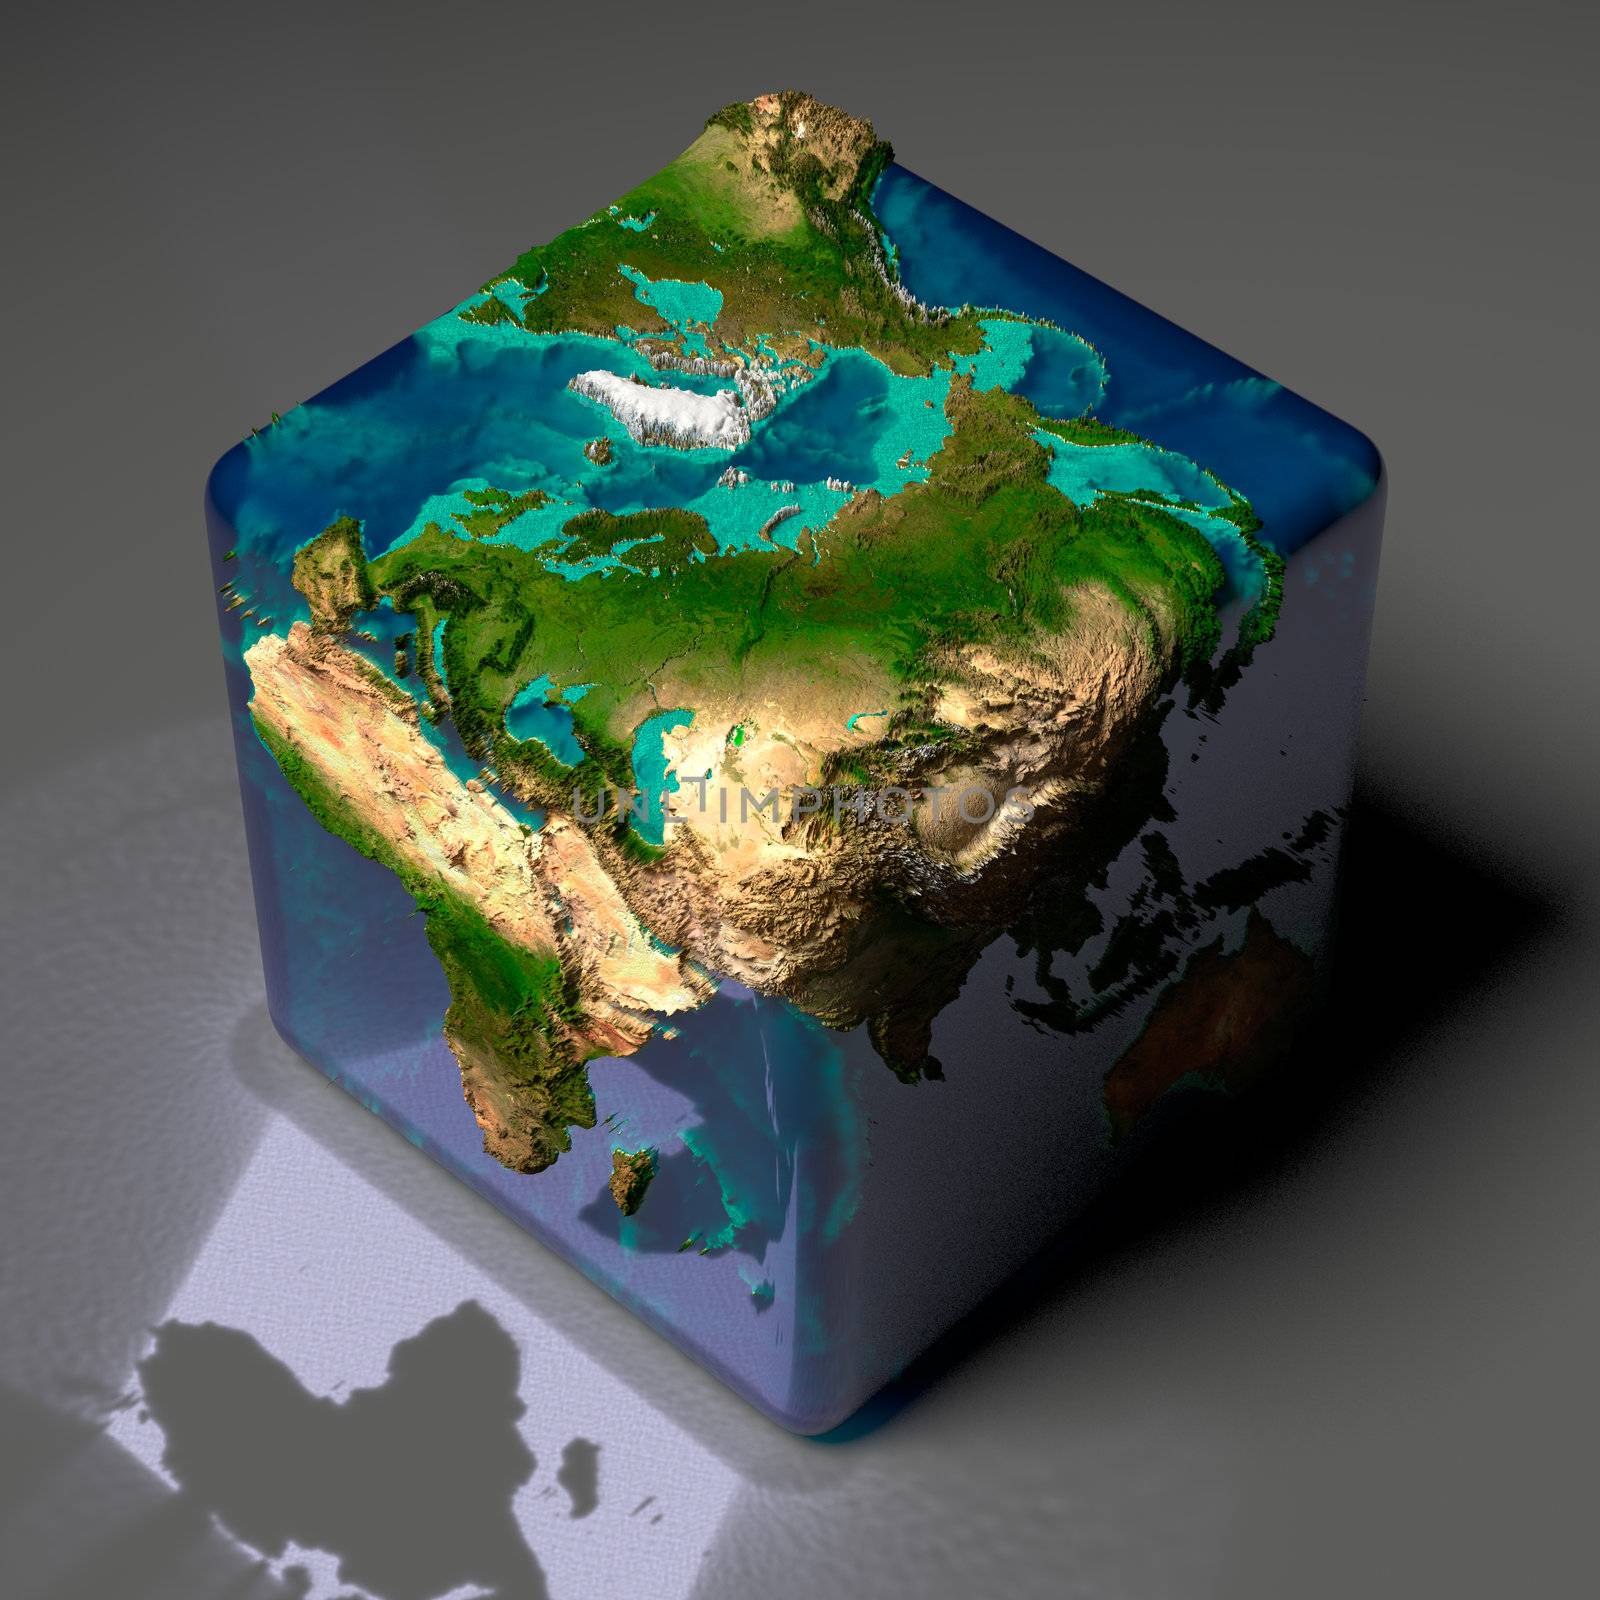 Earth is a cube with translucent water of the oceans and highlights of reflected light on a gray background table